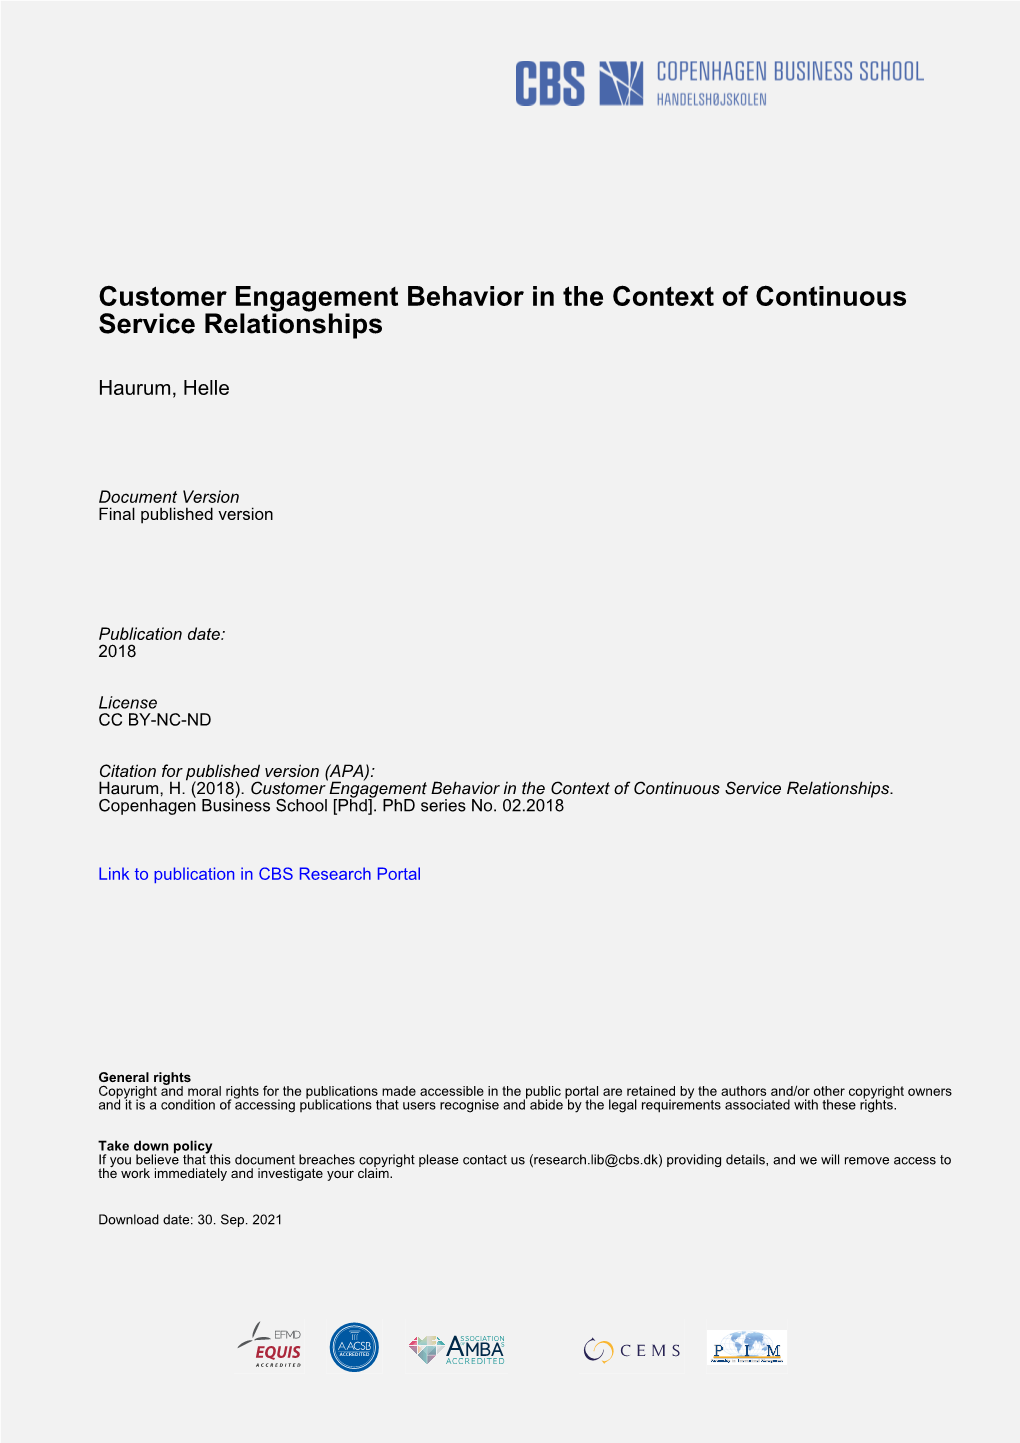 Helle Haurum CUSTOMER ENGAGEMENT BEHAVIOR in the CONTEXT of CONTINUOUS SERVICE RELATIONSHIPS